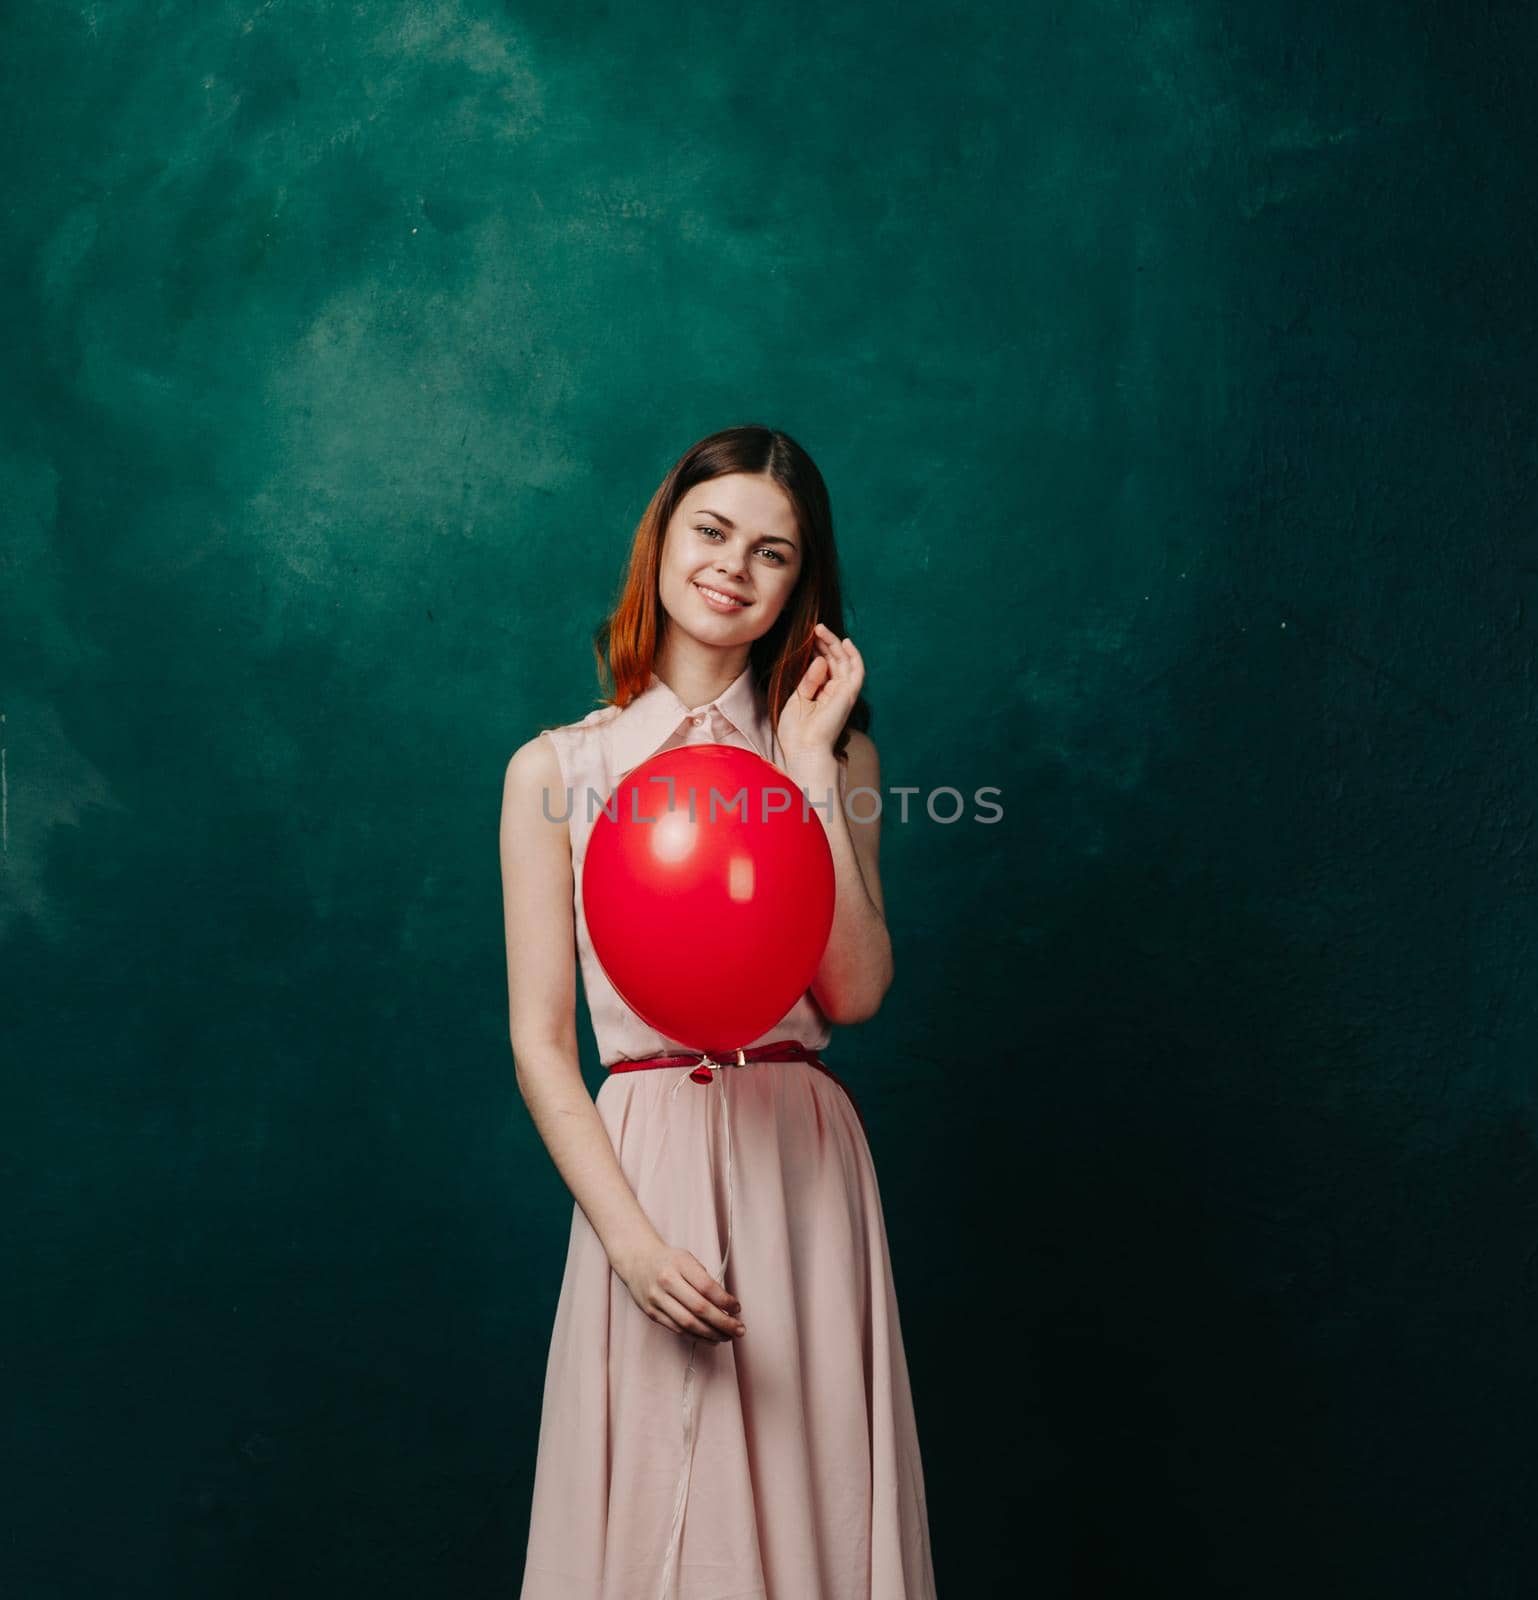 woman with red balloon on green background holiday fun by Vichizh